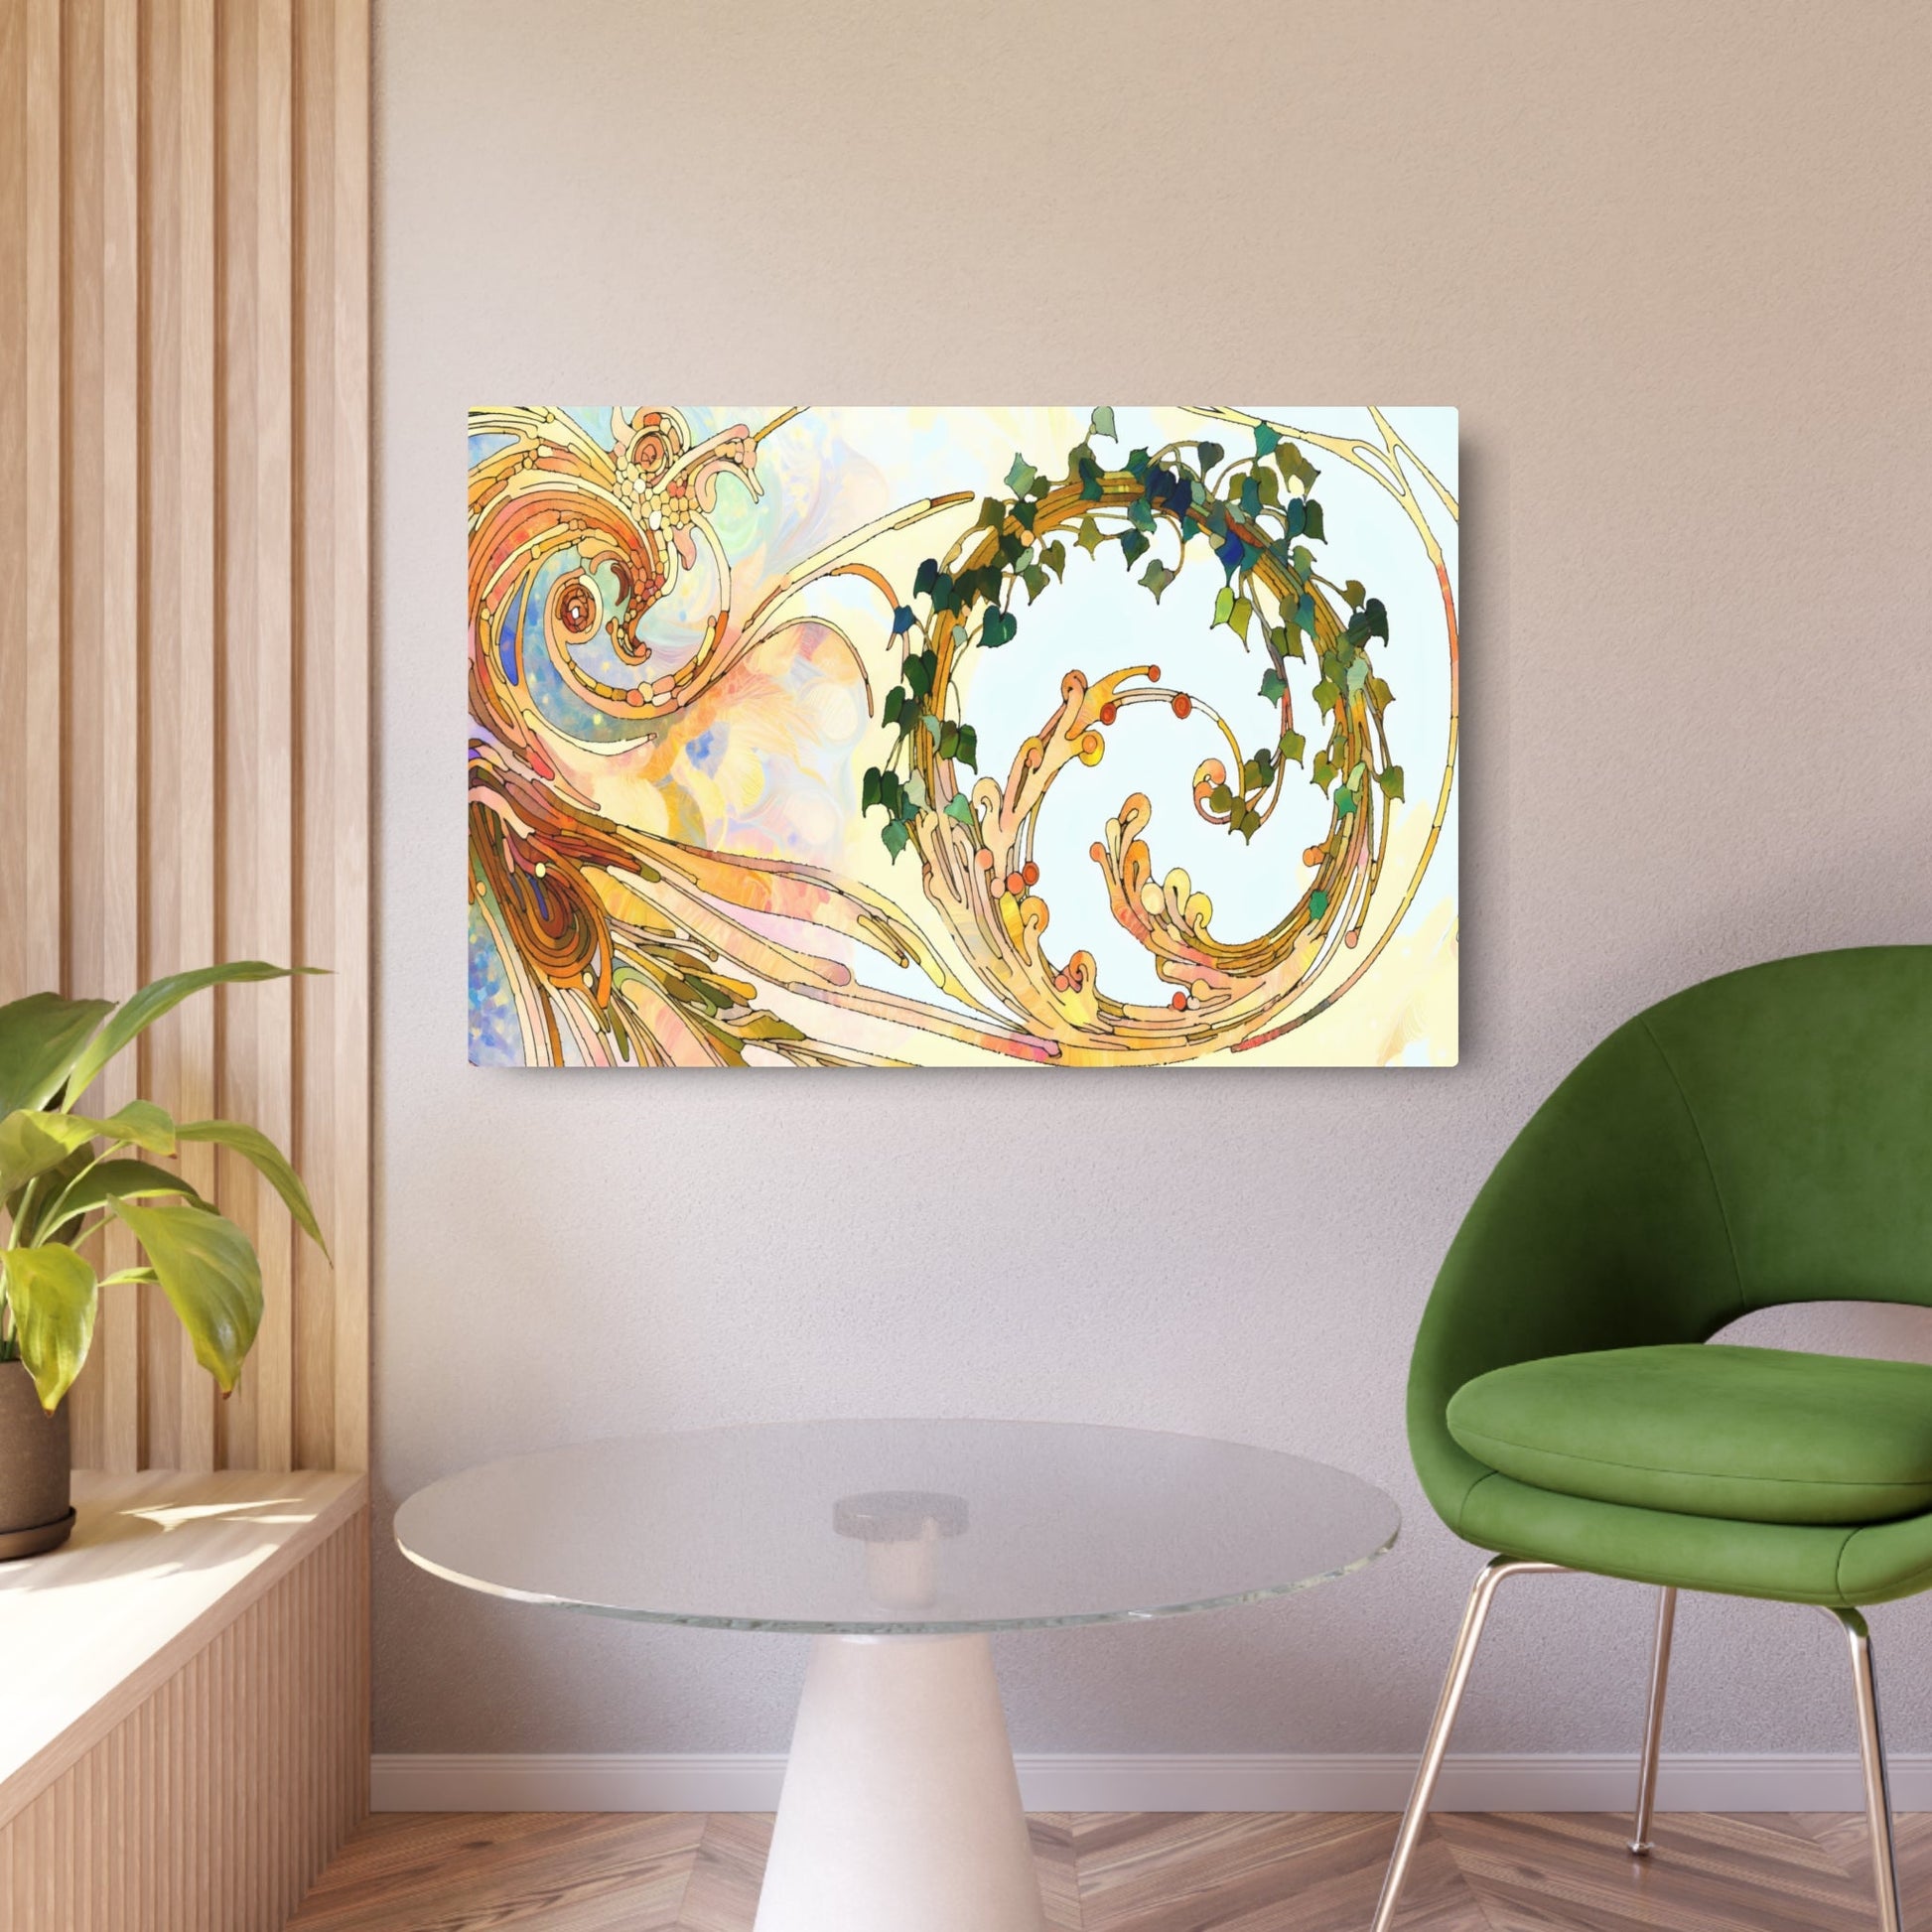 Metal Poster Art | "Art Nouveau Inspired Western Art Style Image with Intricate Flowing Designs and Nature-Inspired Motifs" - Metal Poster Art 36″ x 24″ (Horizontal) 0.12''